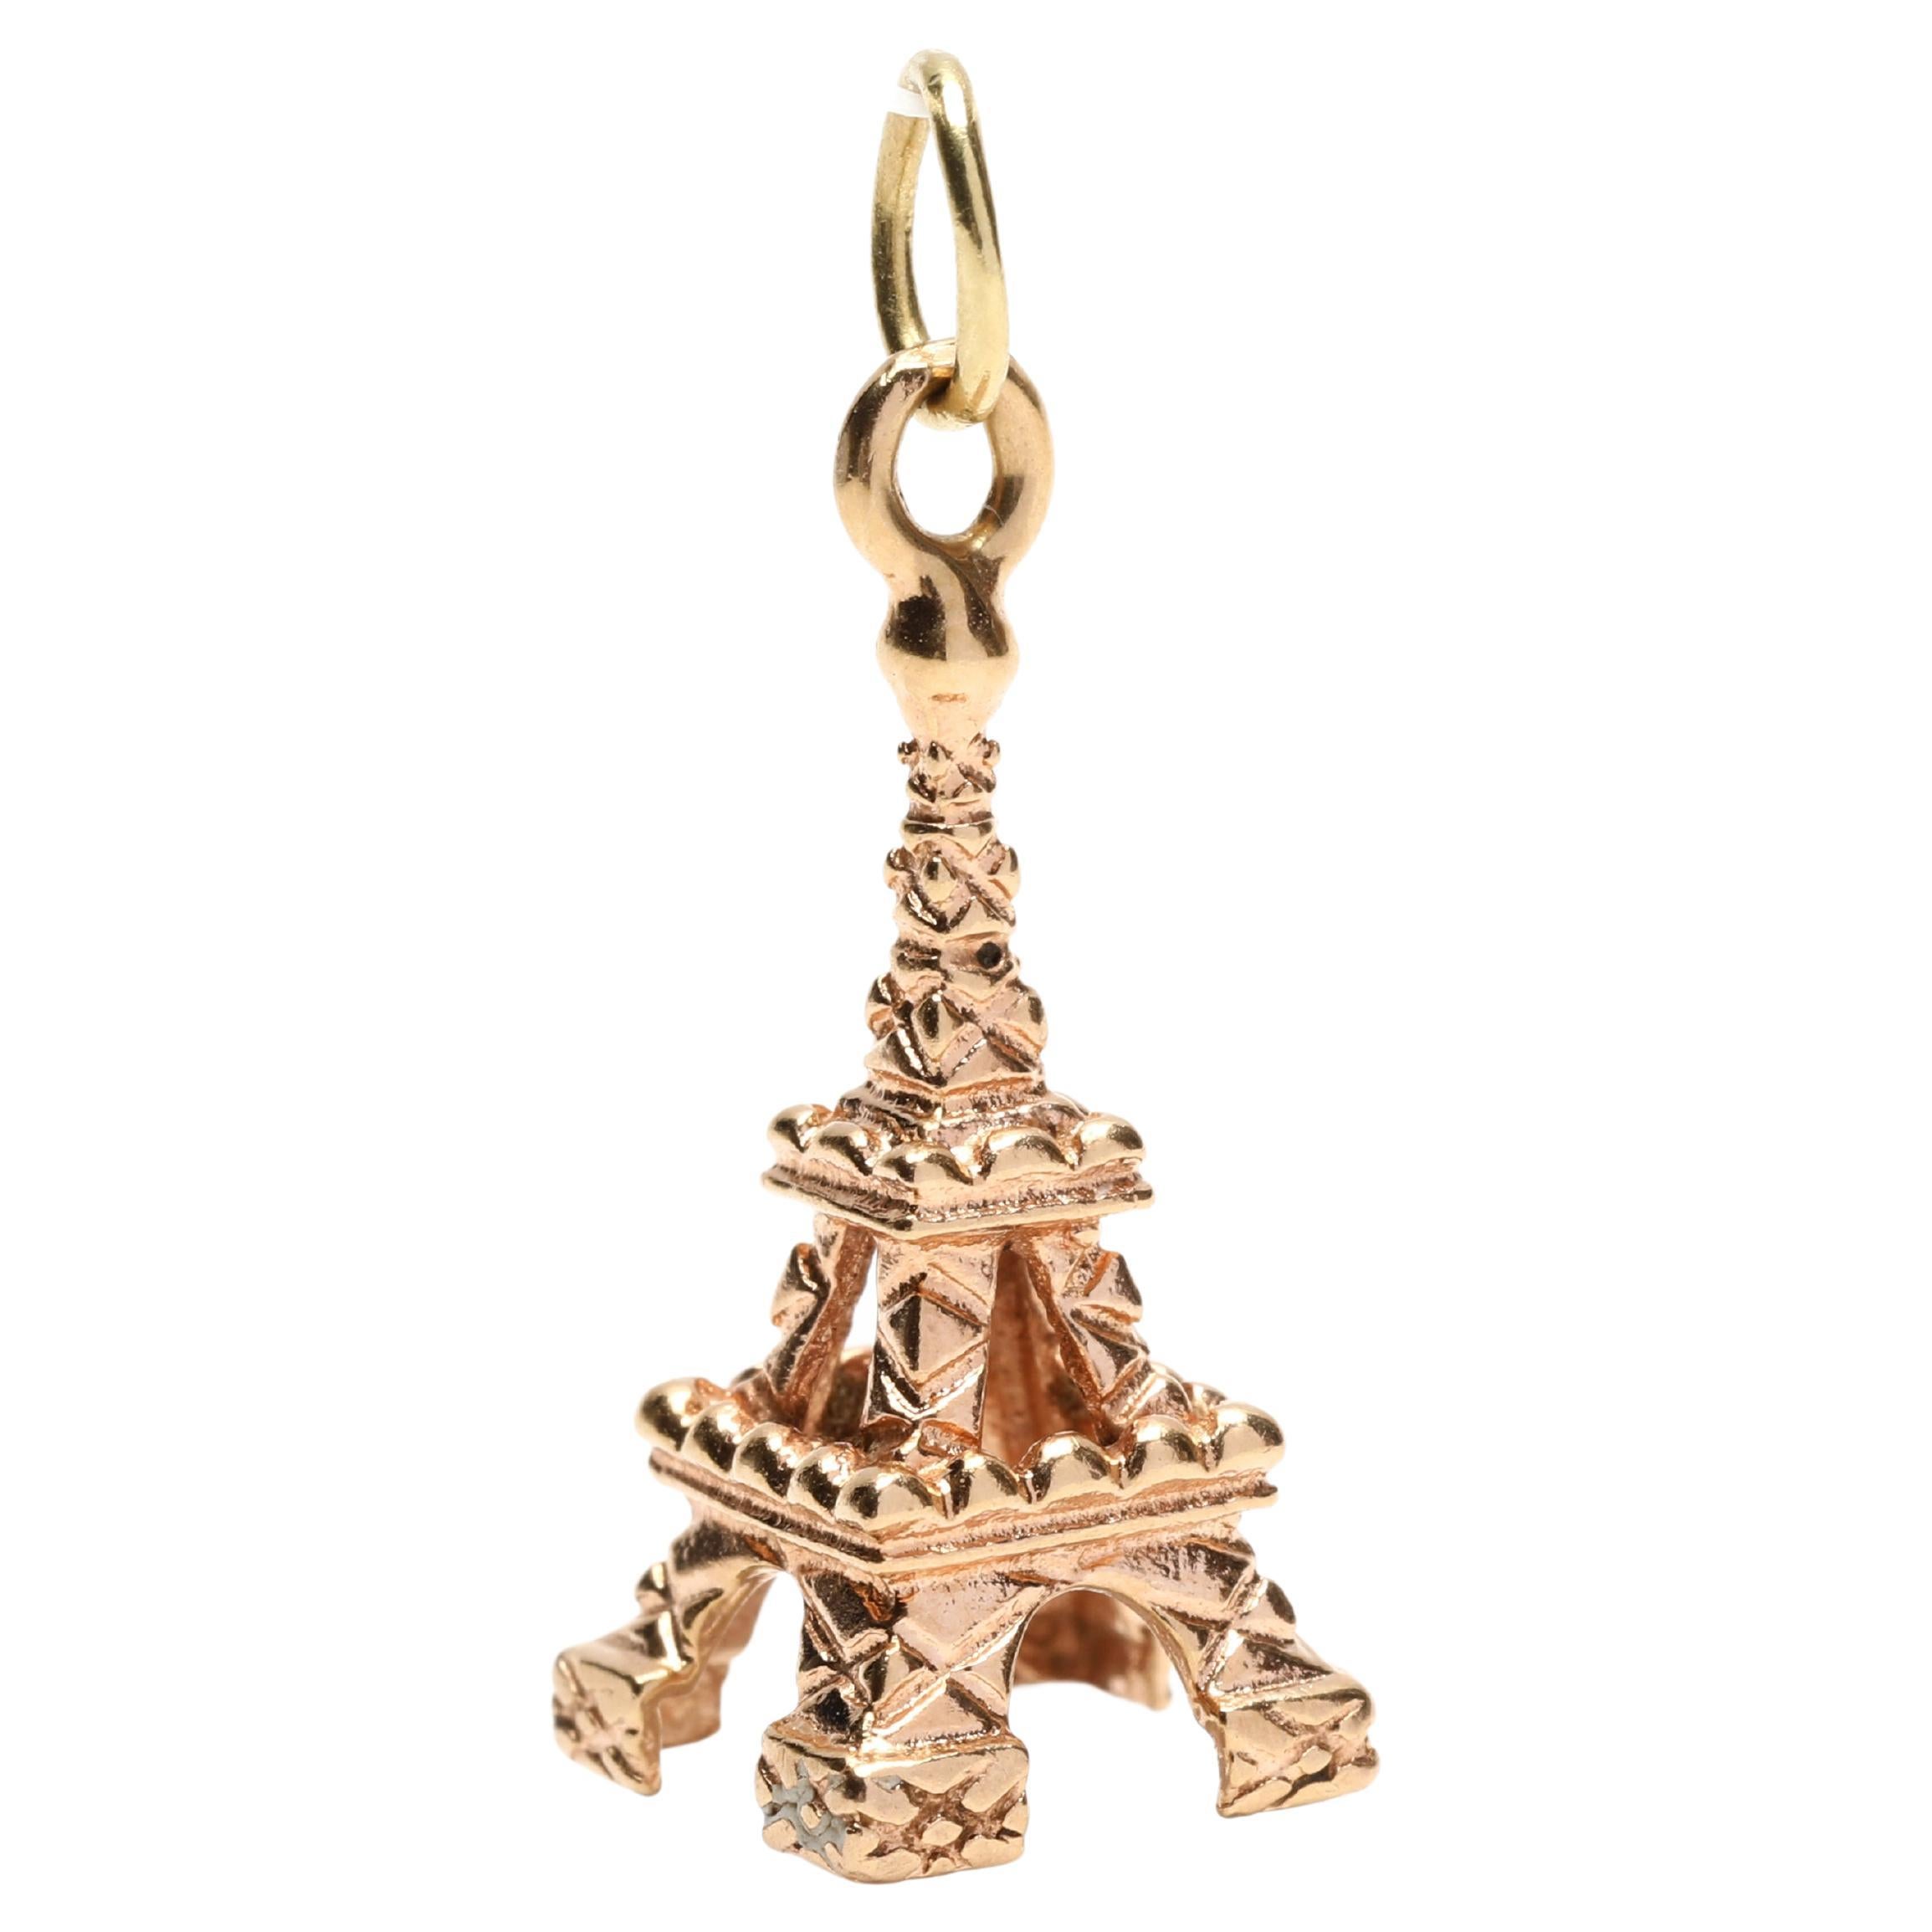 Small Gold Eiffel Tower Charm, 18k Yellow Gold, Gold Paris For Sale